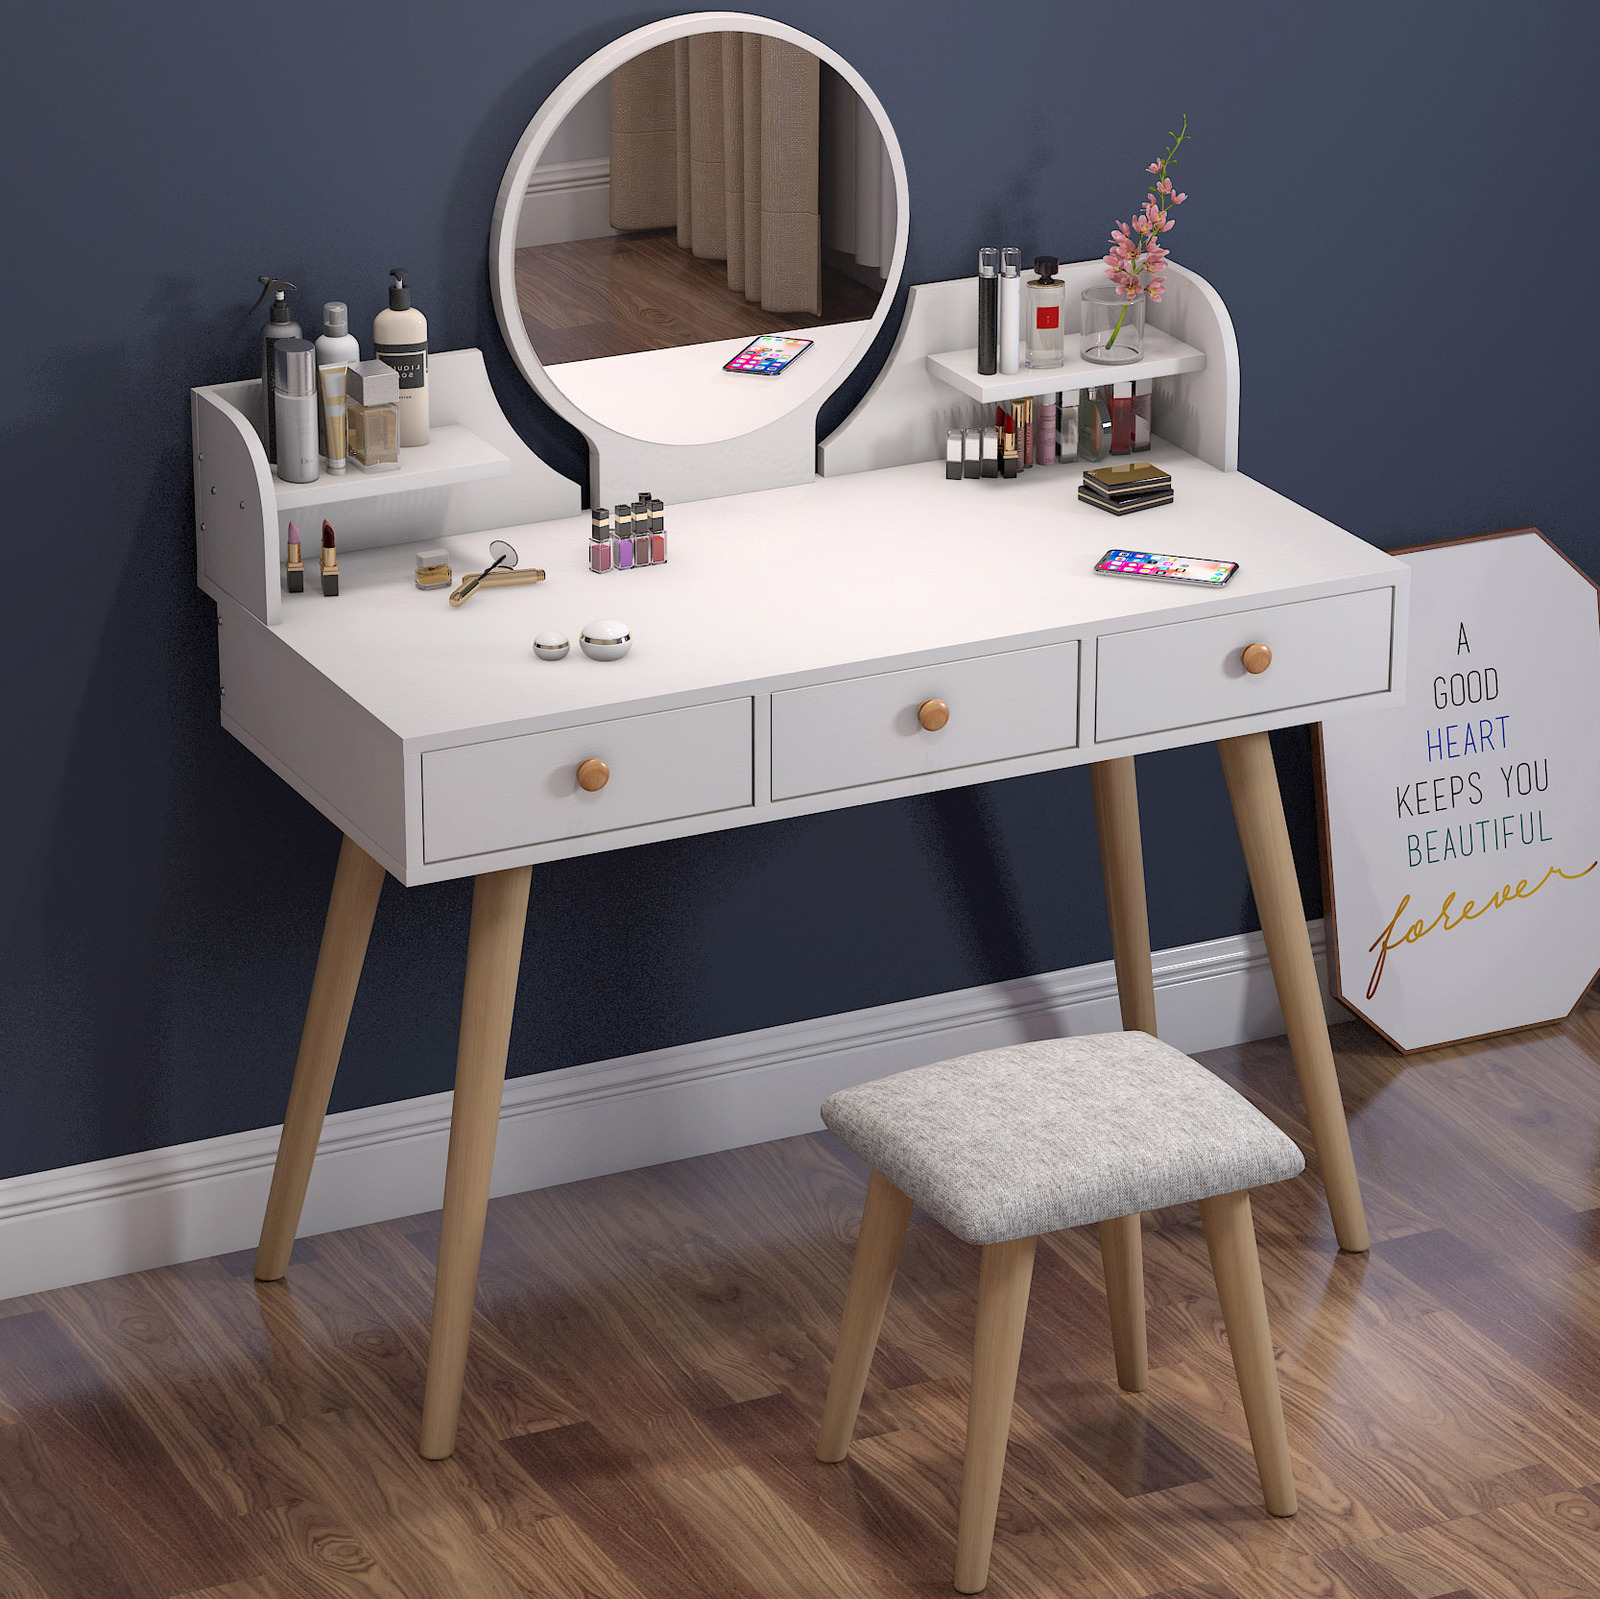 Queen Large Dresser Vanity Table with Mirror, Stool and Storage Drawers Set (White)